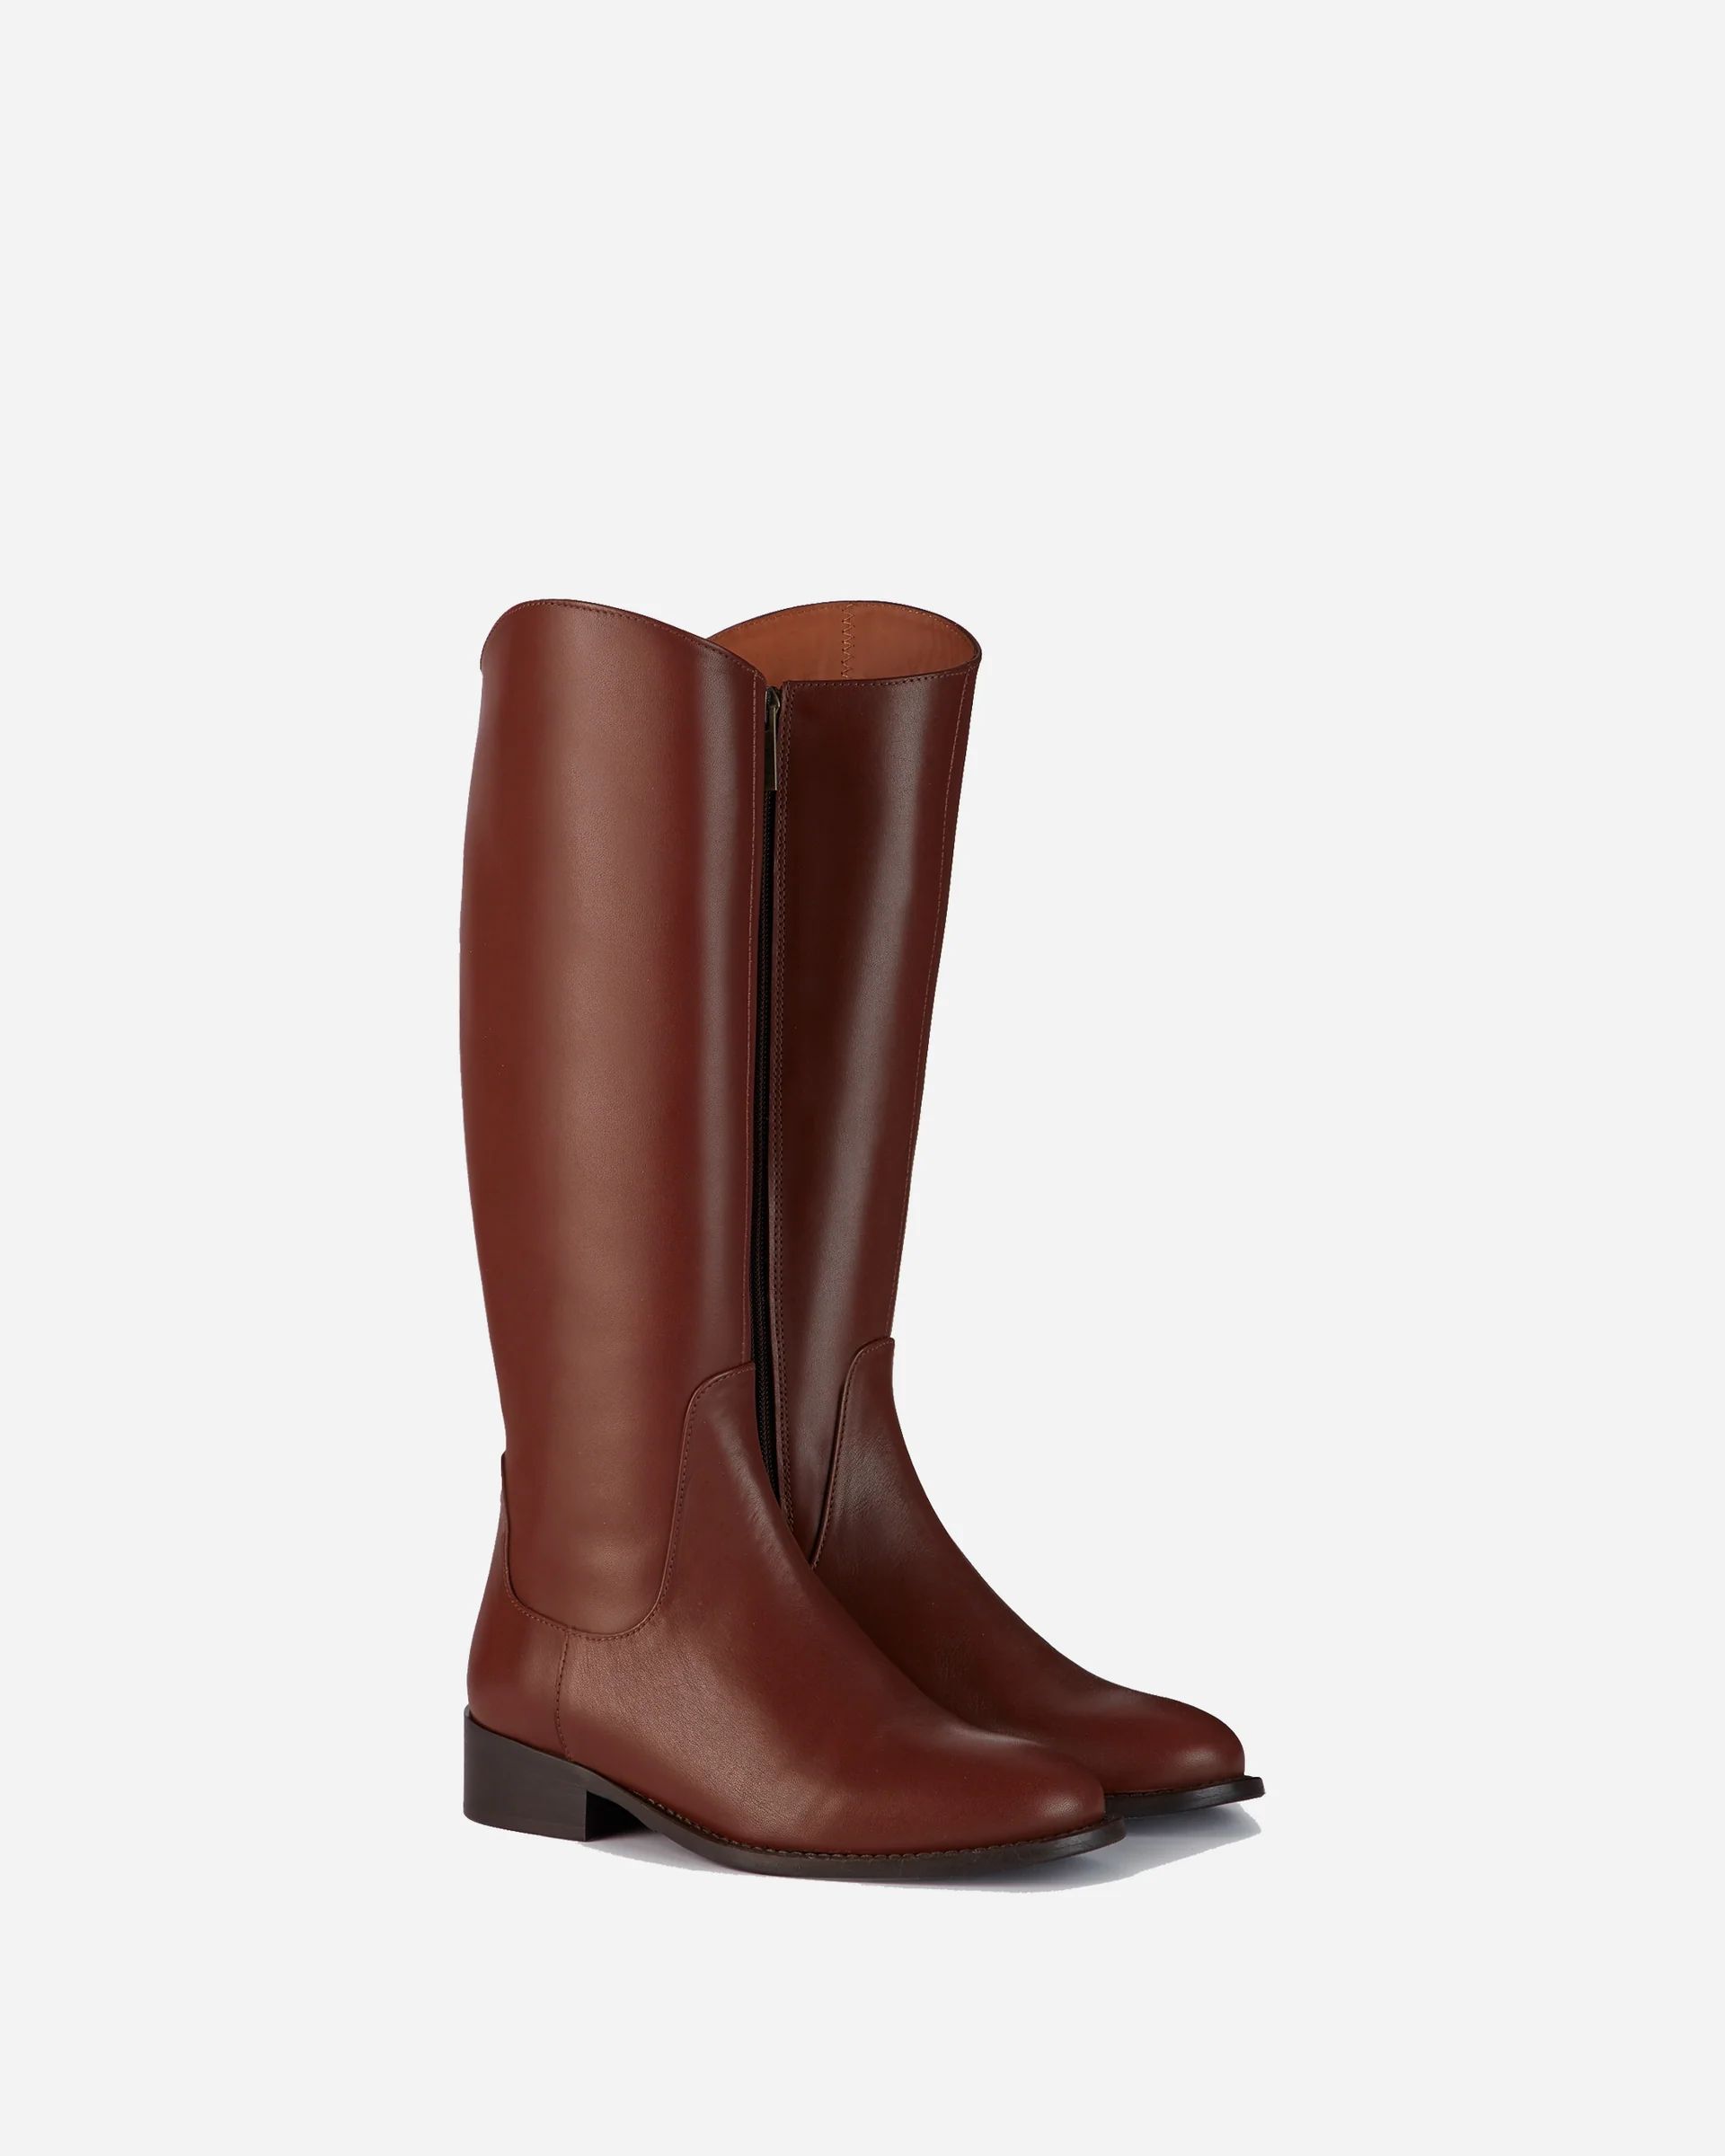 Verity Knee High Boots in Tan Leather | DuoBoots